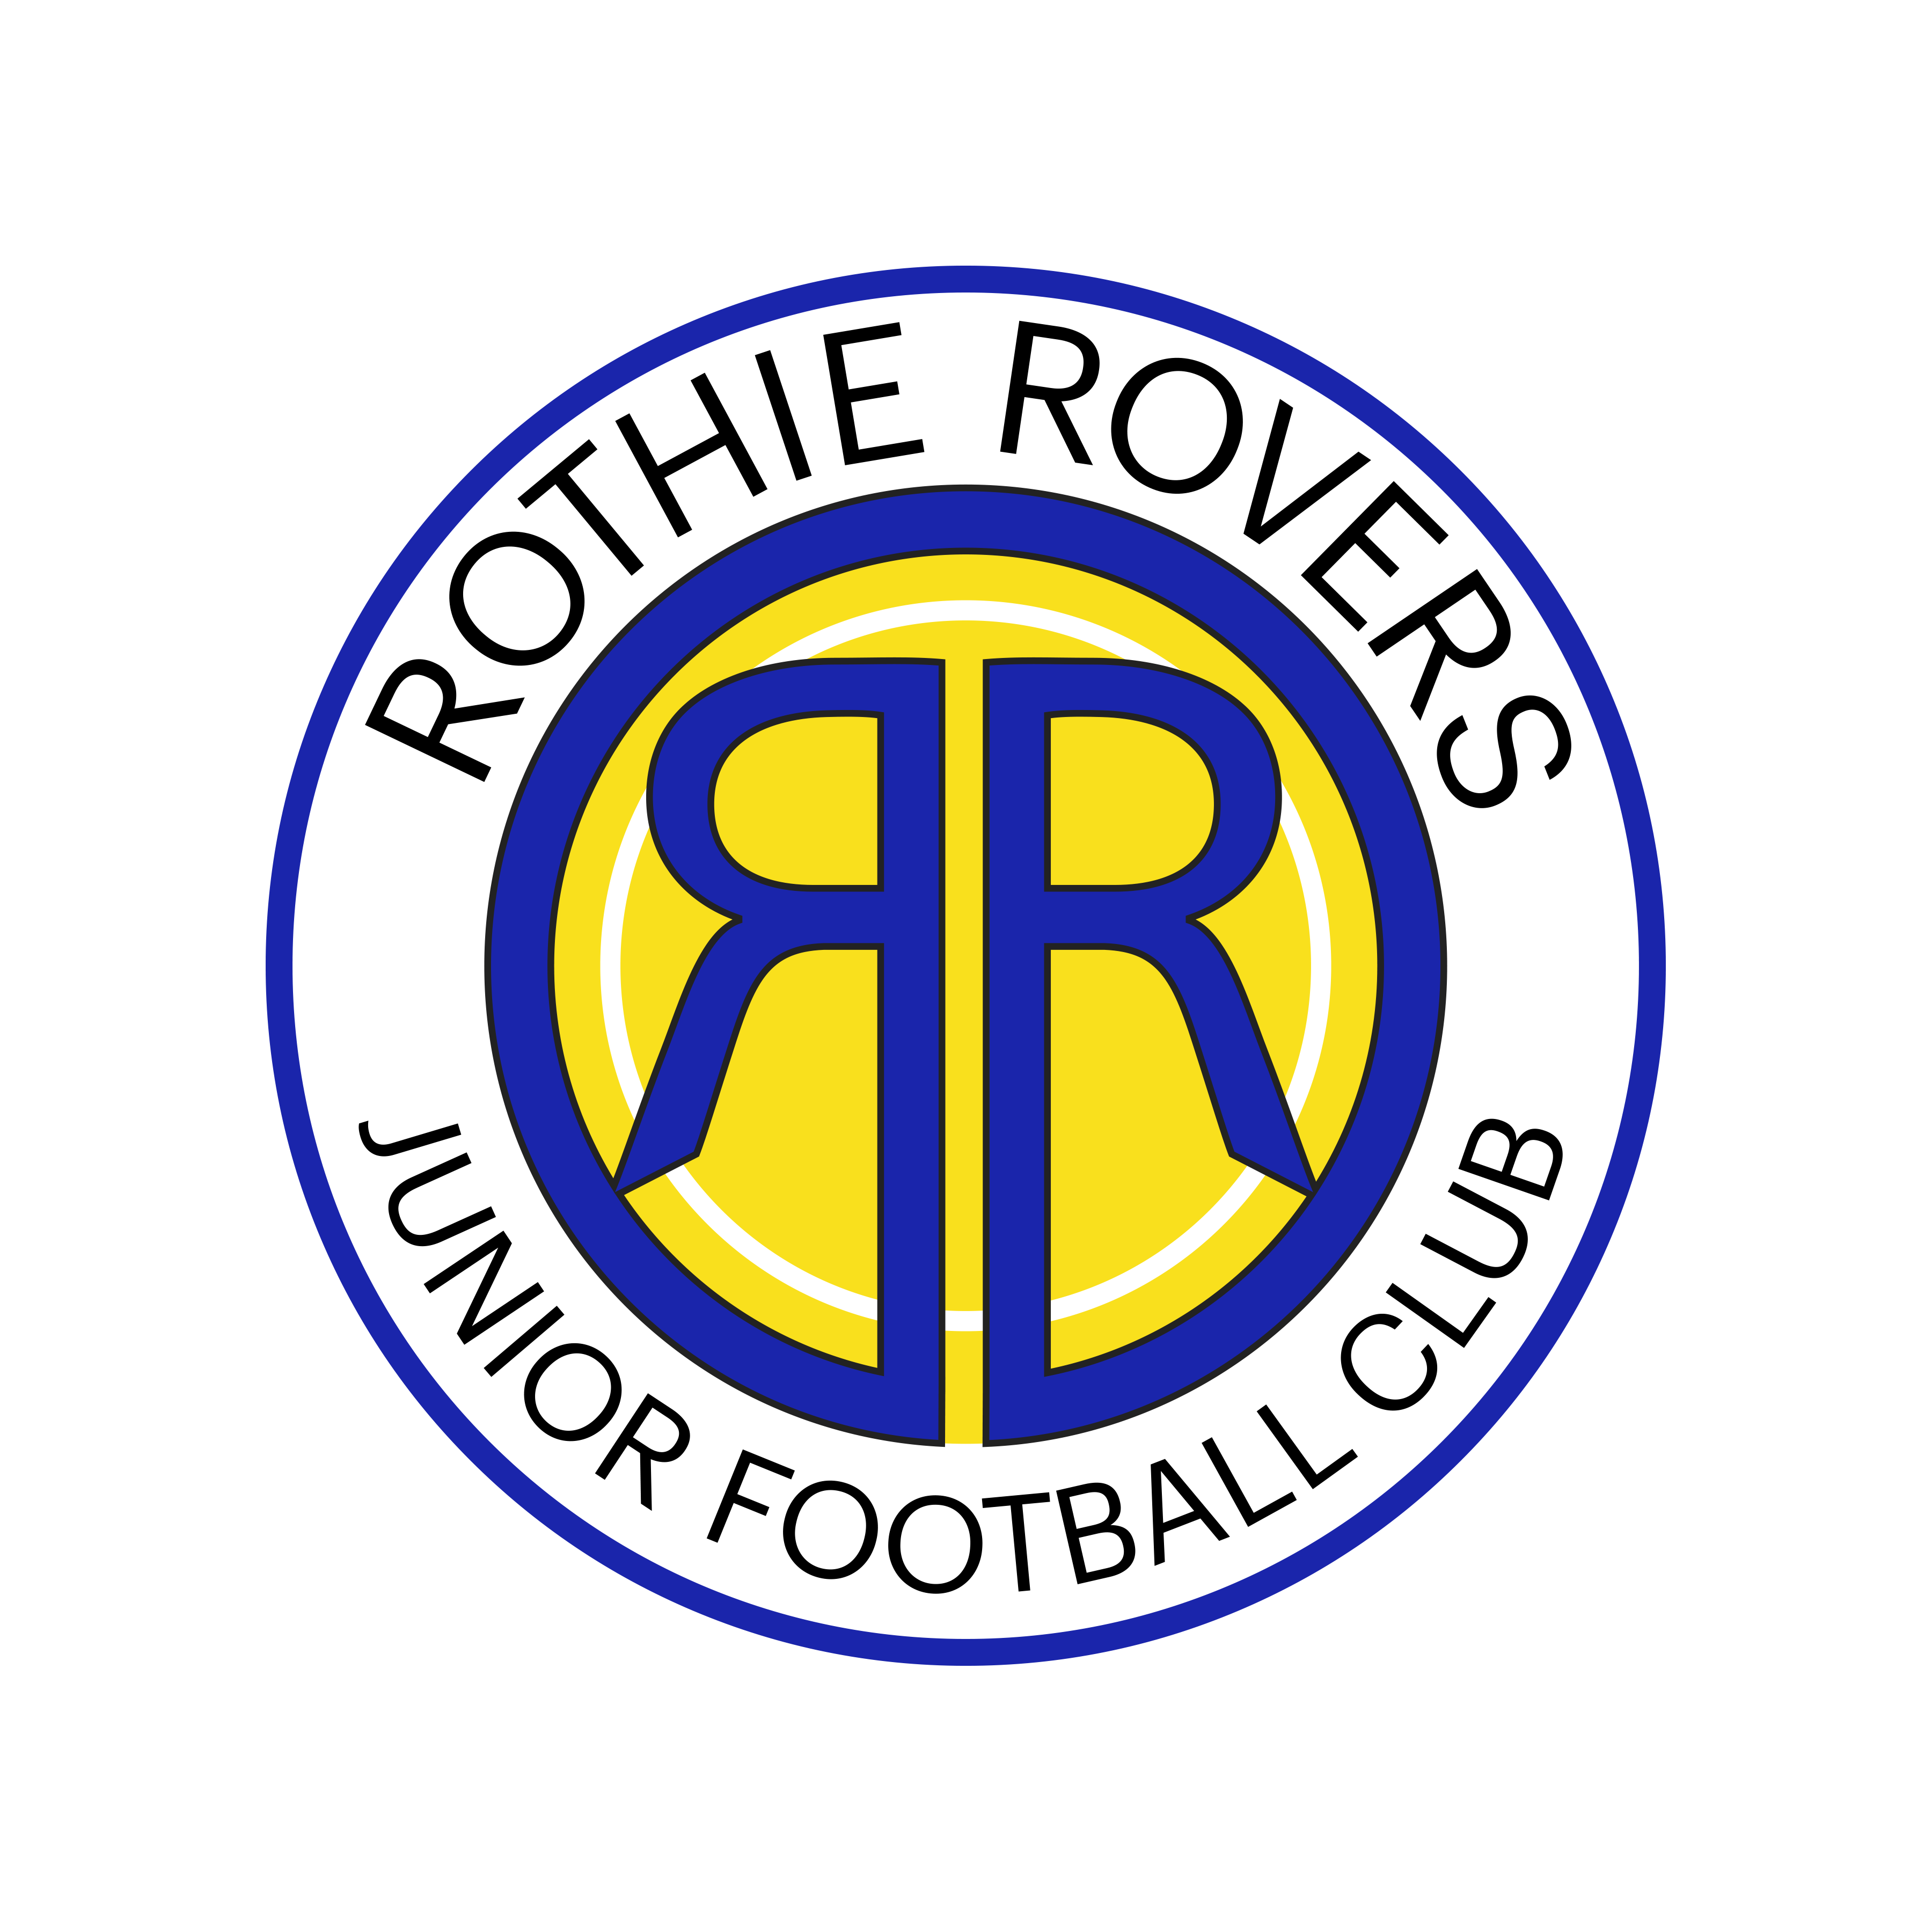 Rothie Rovers